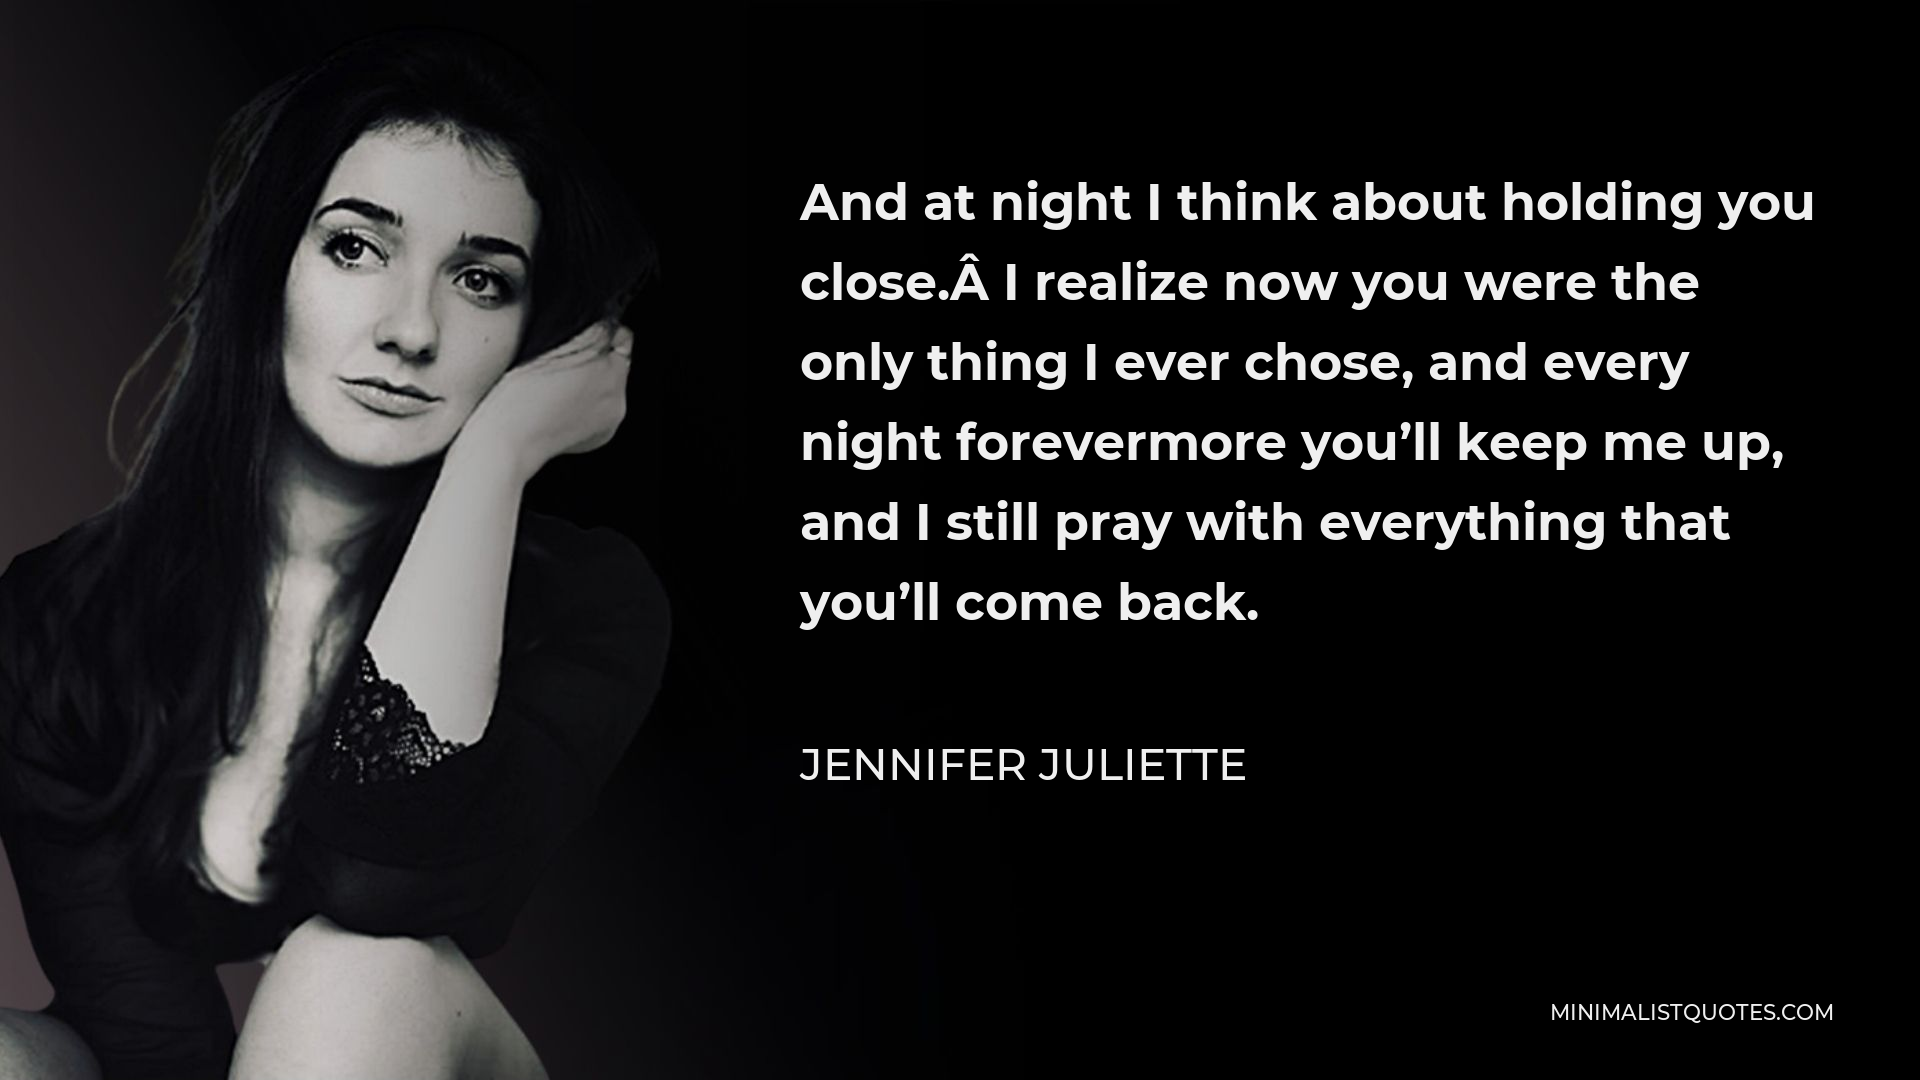 Jennifer Juliette Quote - And at night I think about holding you close. I realize now you were the only thing I ever chose, and every night forevermore you’ll keep me up, and I still pray with everything that you’ll come back.